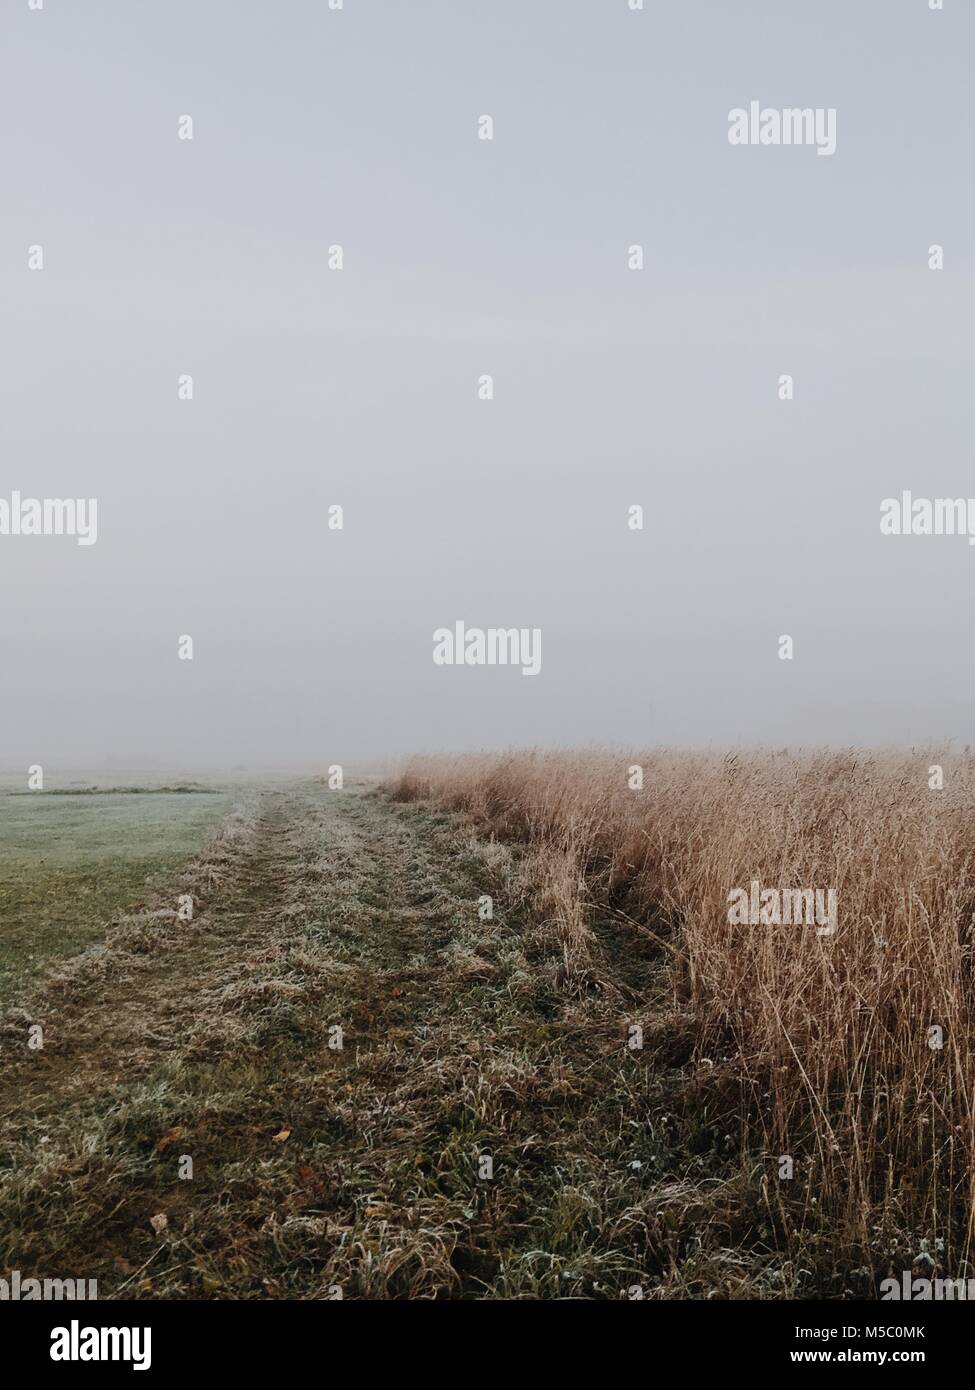 White nothing behind wheat field. Harsh autumn scene with fog. Stock Photo